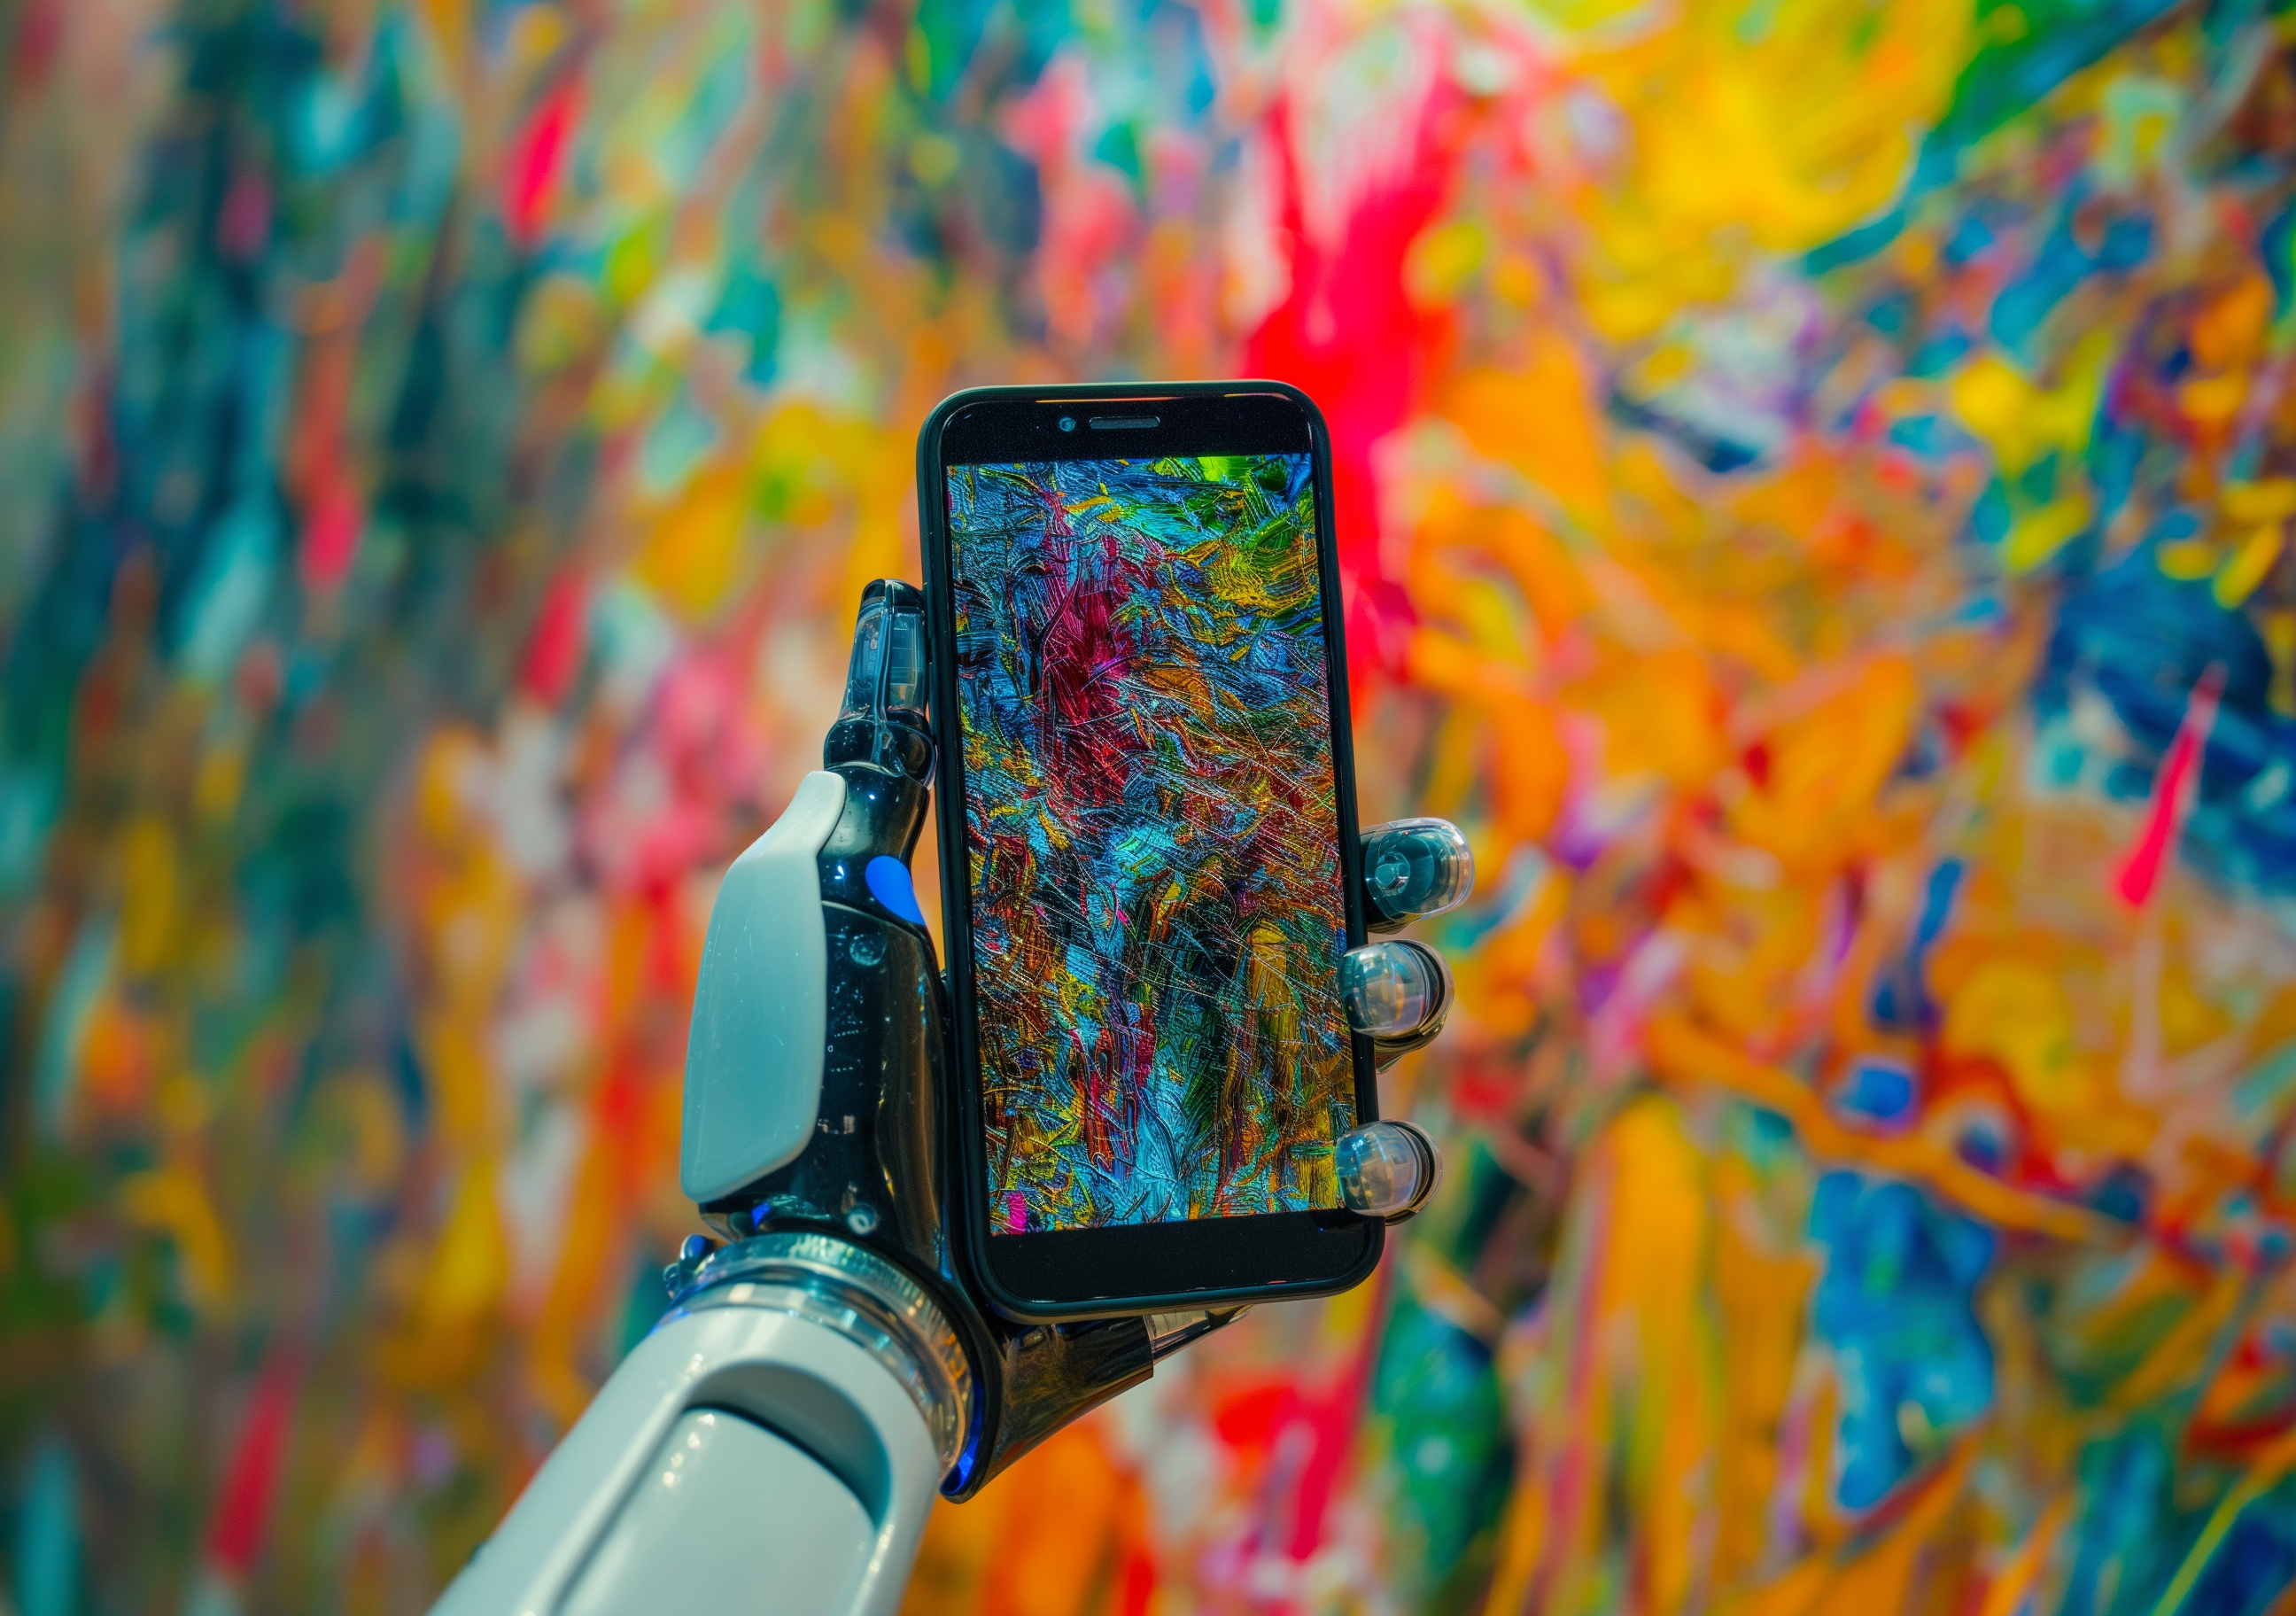 POV of a roboter arm holding a smartphone in the style of van gogh, bright colors, stock photo, high res –ar 20:14 –v 5 | © Der Mons / Michael Bauer